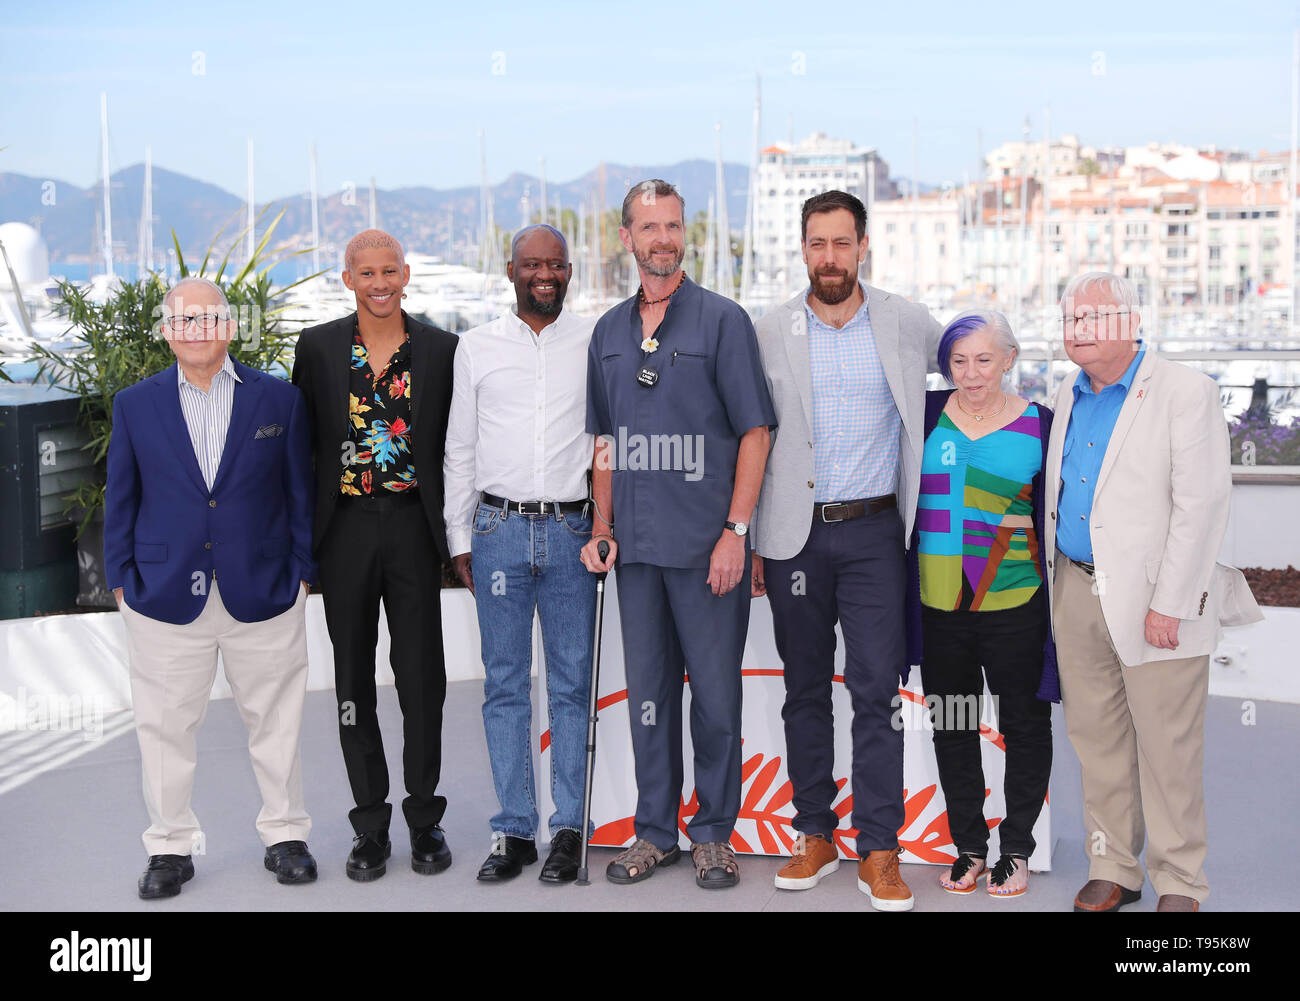 (190516) -- CANNES, May 16, 2019 (Xinhua) -- Cast members pose during a photocall for the film "5B" screened in Special Screenings during the 72nd Cannes Film Festival in Cannes, France, May 16, 2019. (Xinhua/Gao Jing) Stock Photo